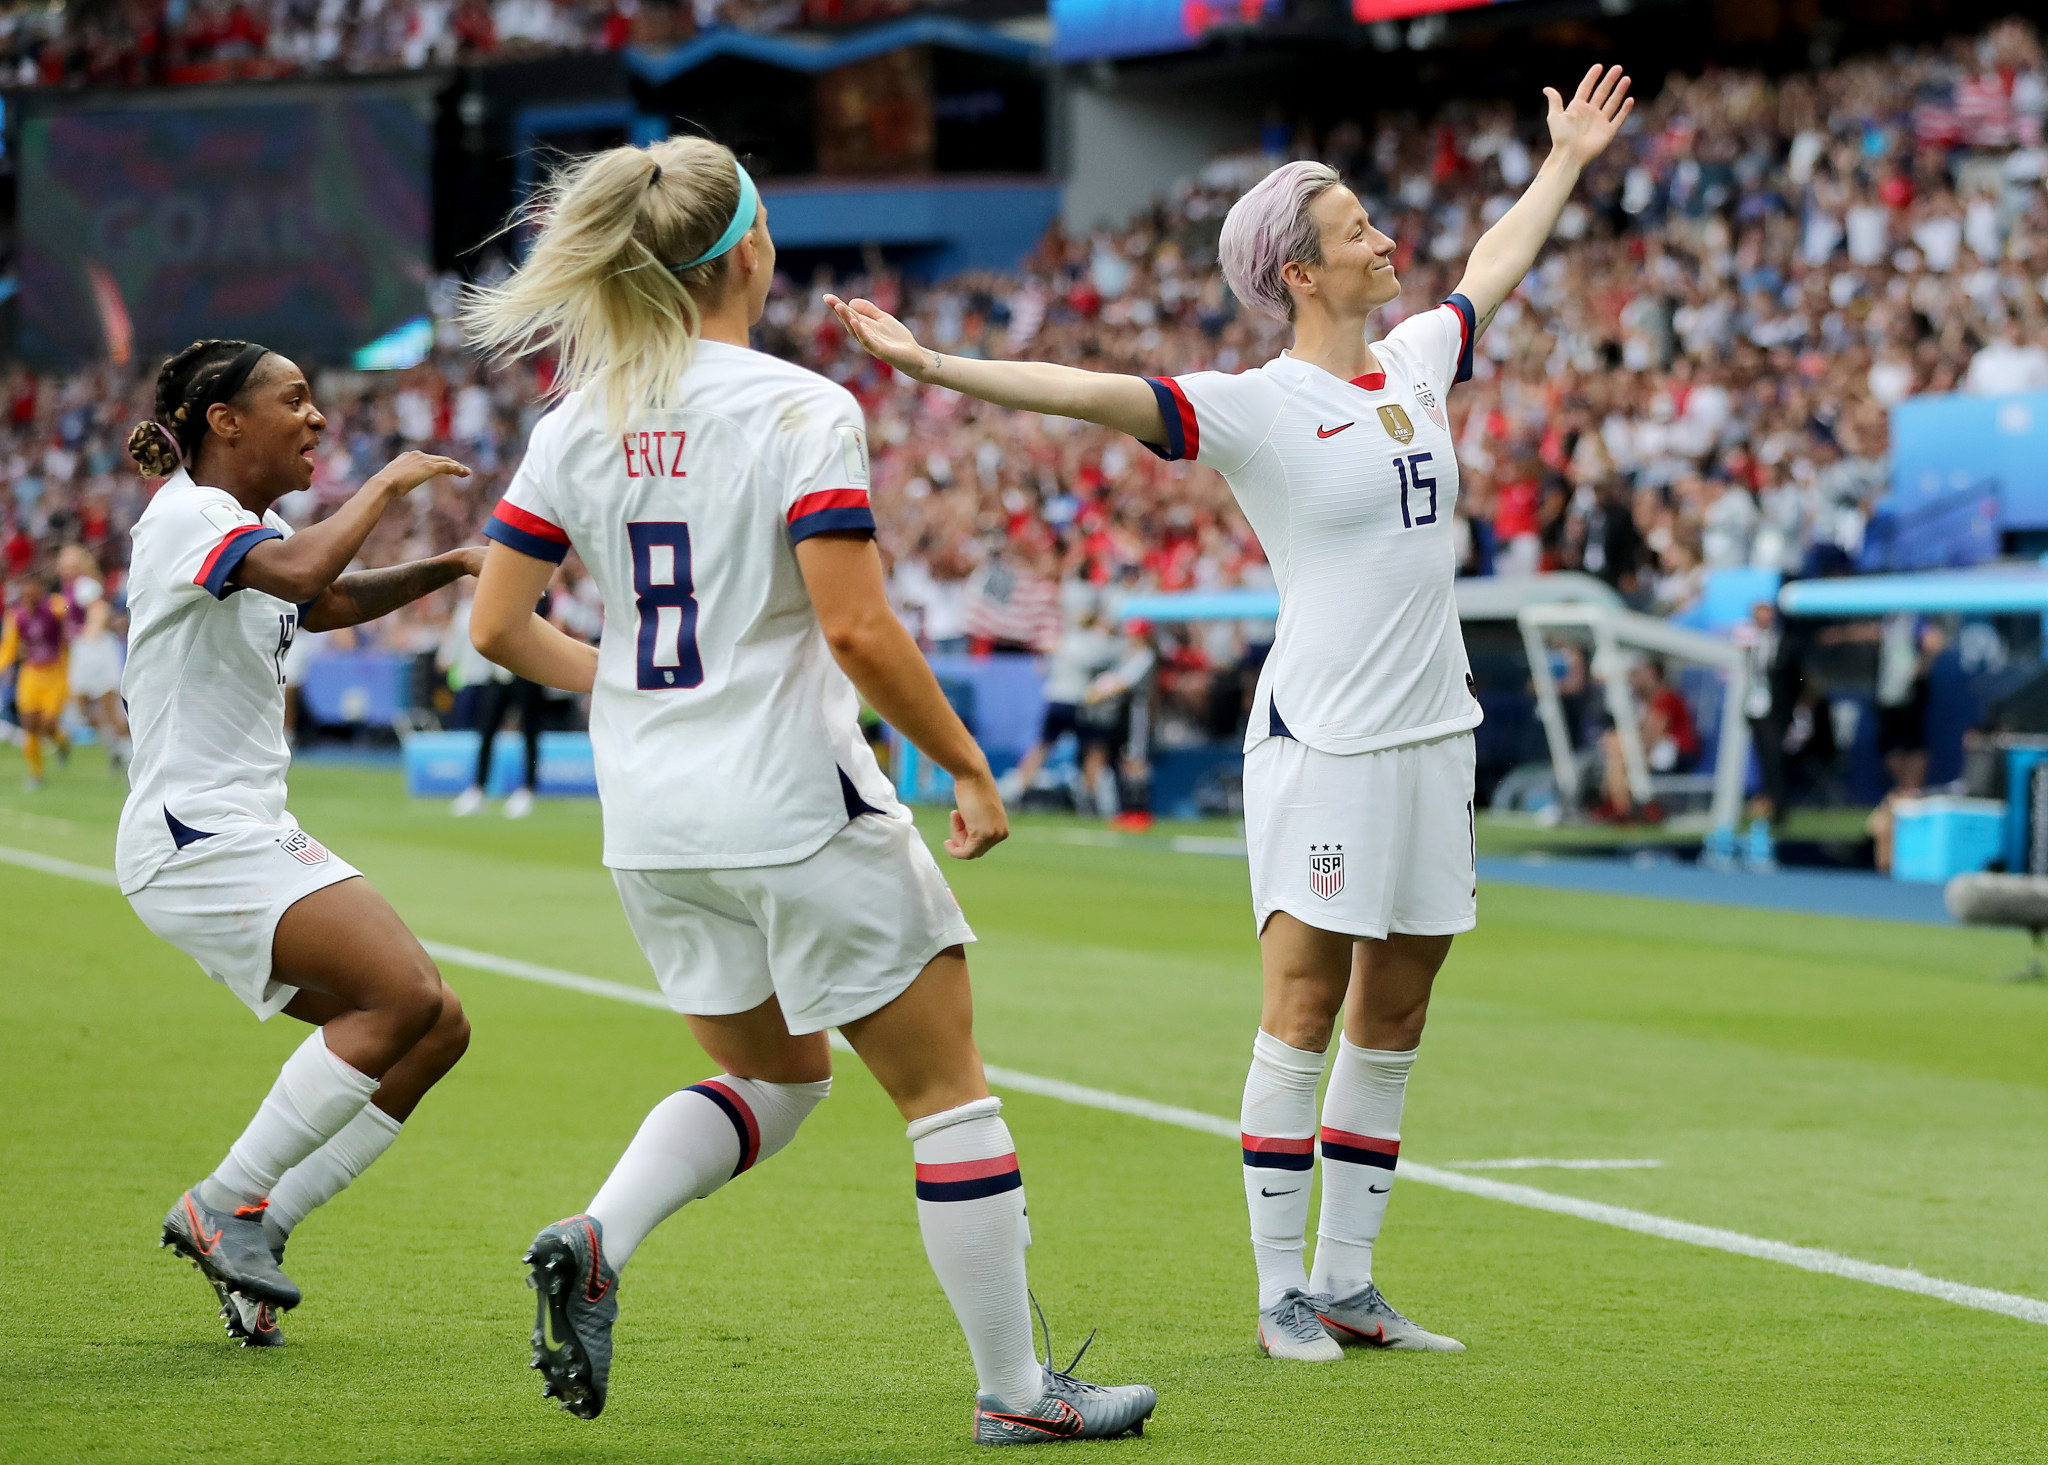 Megan Rapinoe of the United States caught the attention of President Donald Trump while playing in the Women's World Cup ©Getty Images